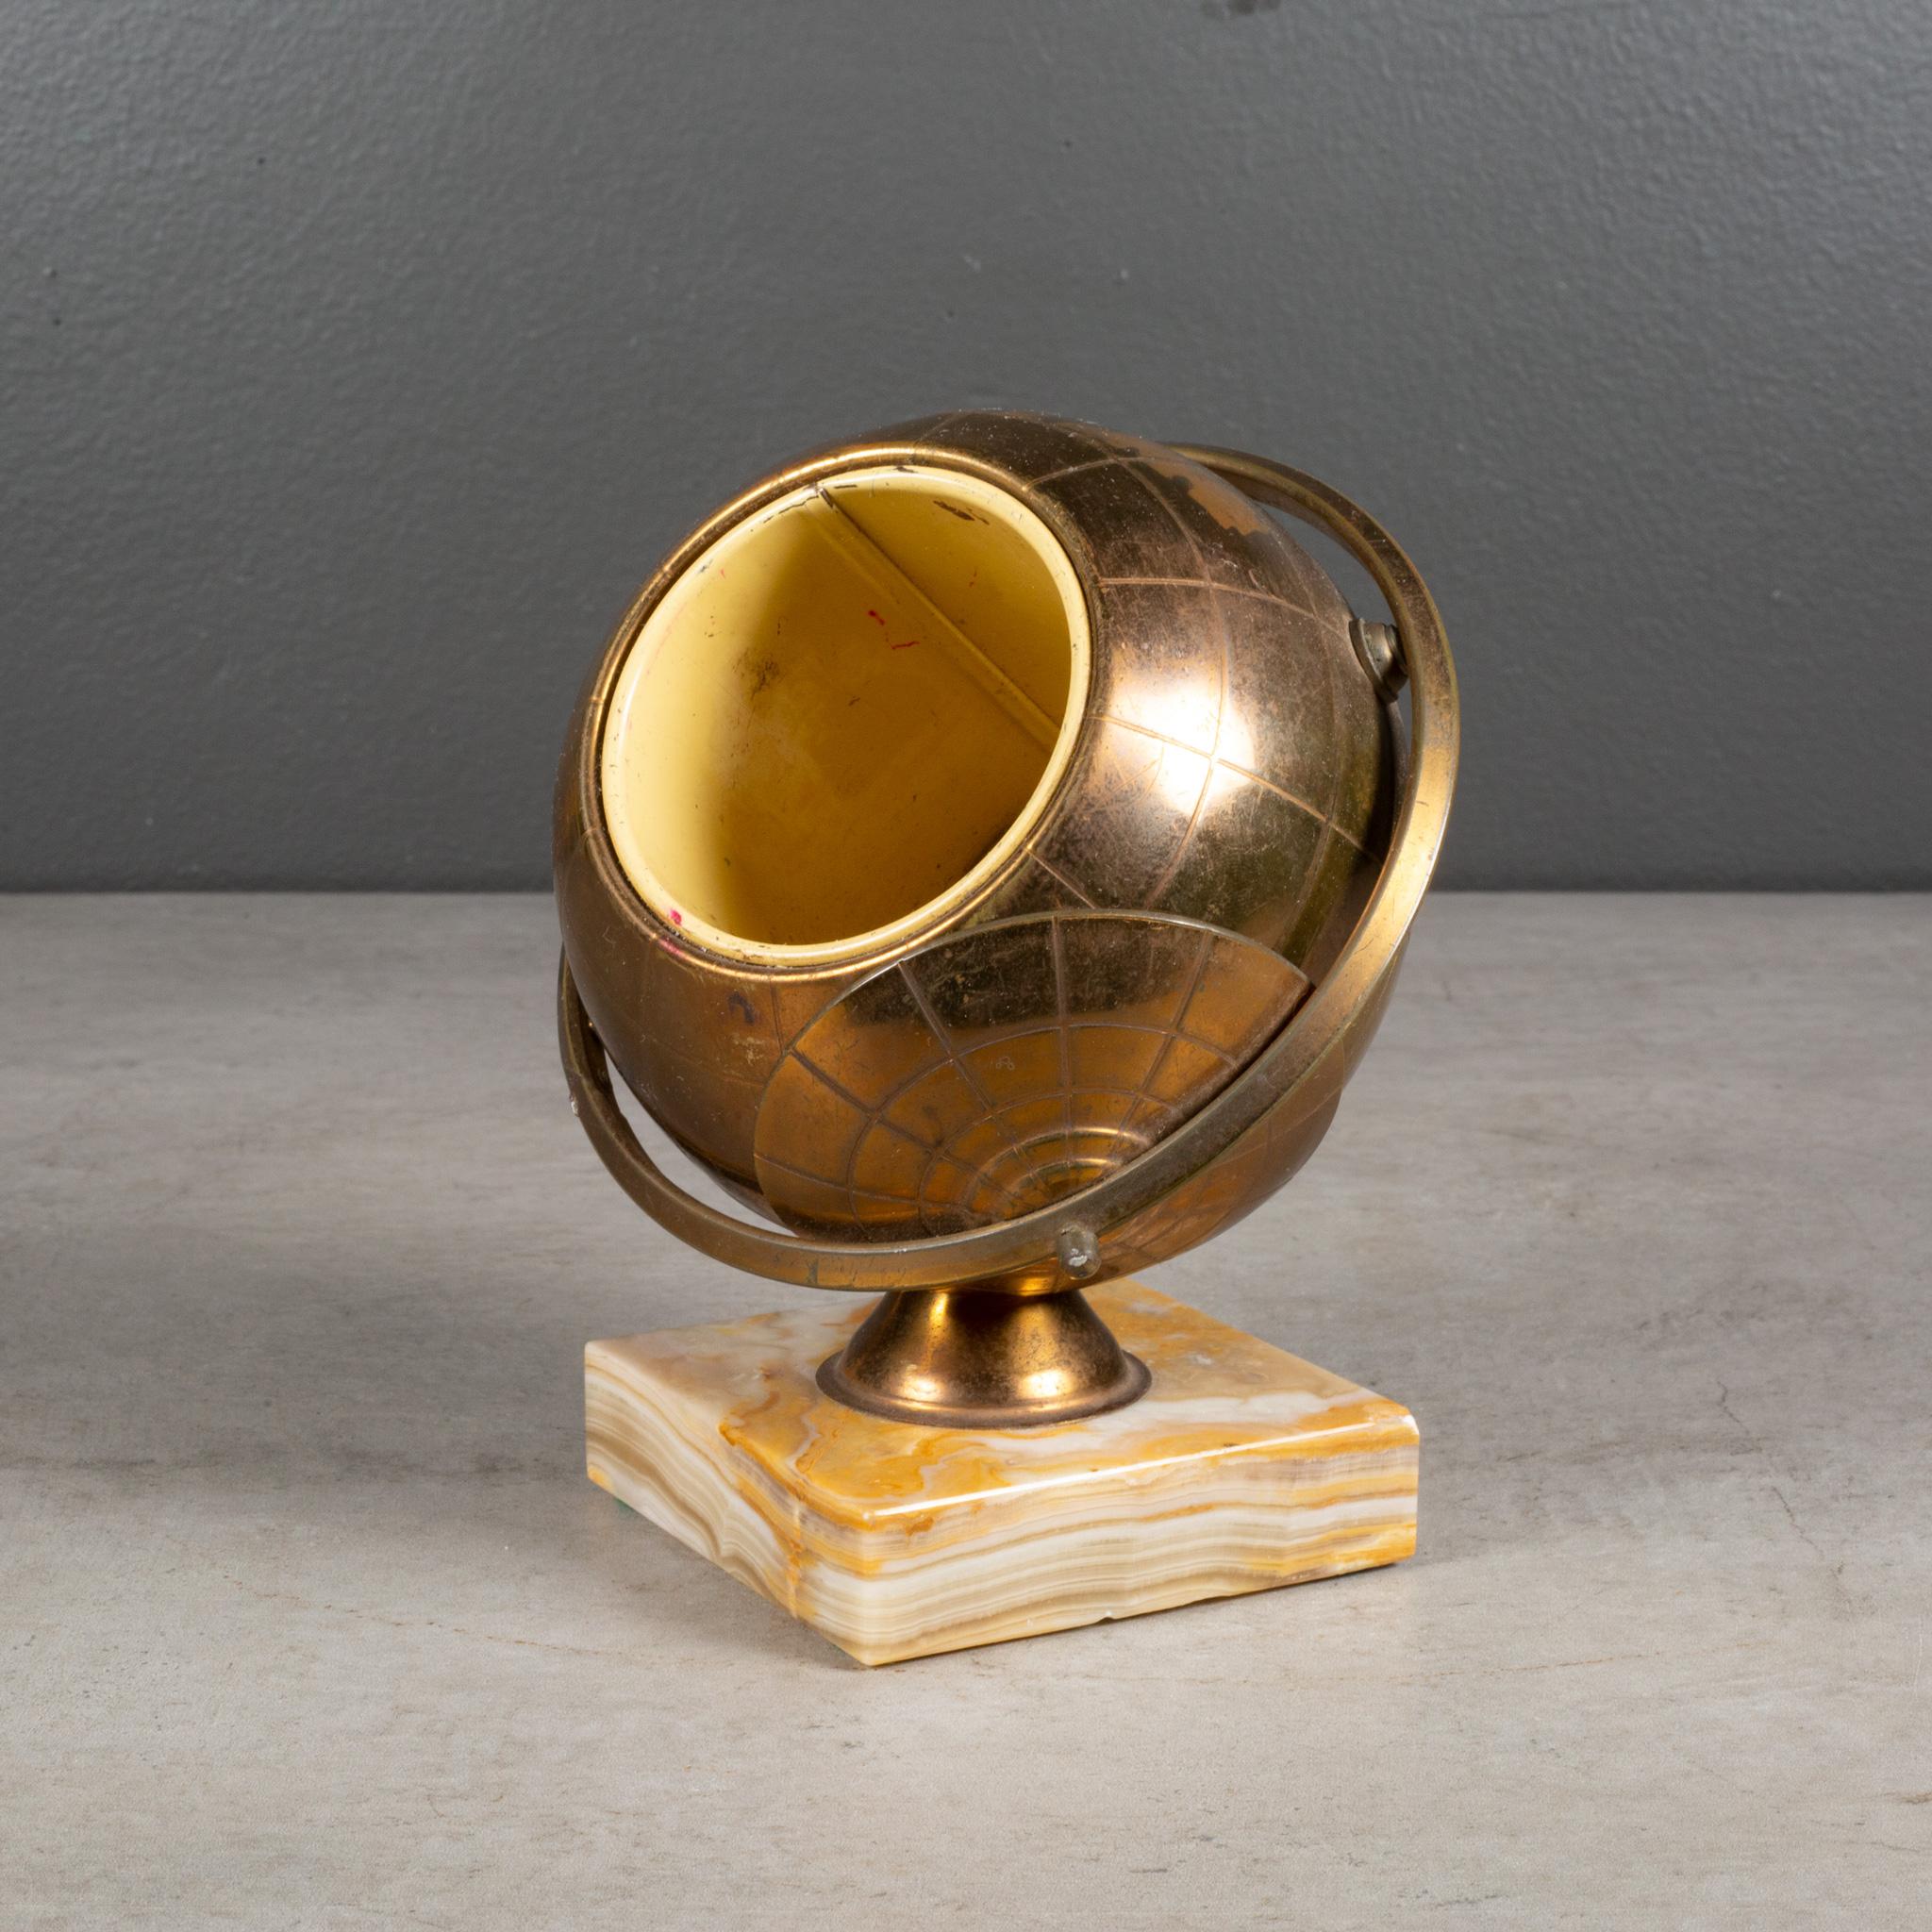 ABOUT 

An original mid-century brass cigarette holder mounted on a solid marble base. The lid slides open on the globe's axis to reveal a metal interior designed to hold cigarettes. This piece has retained its original finish and has the